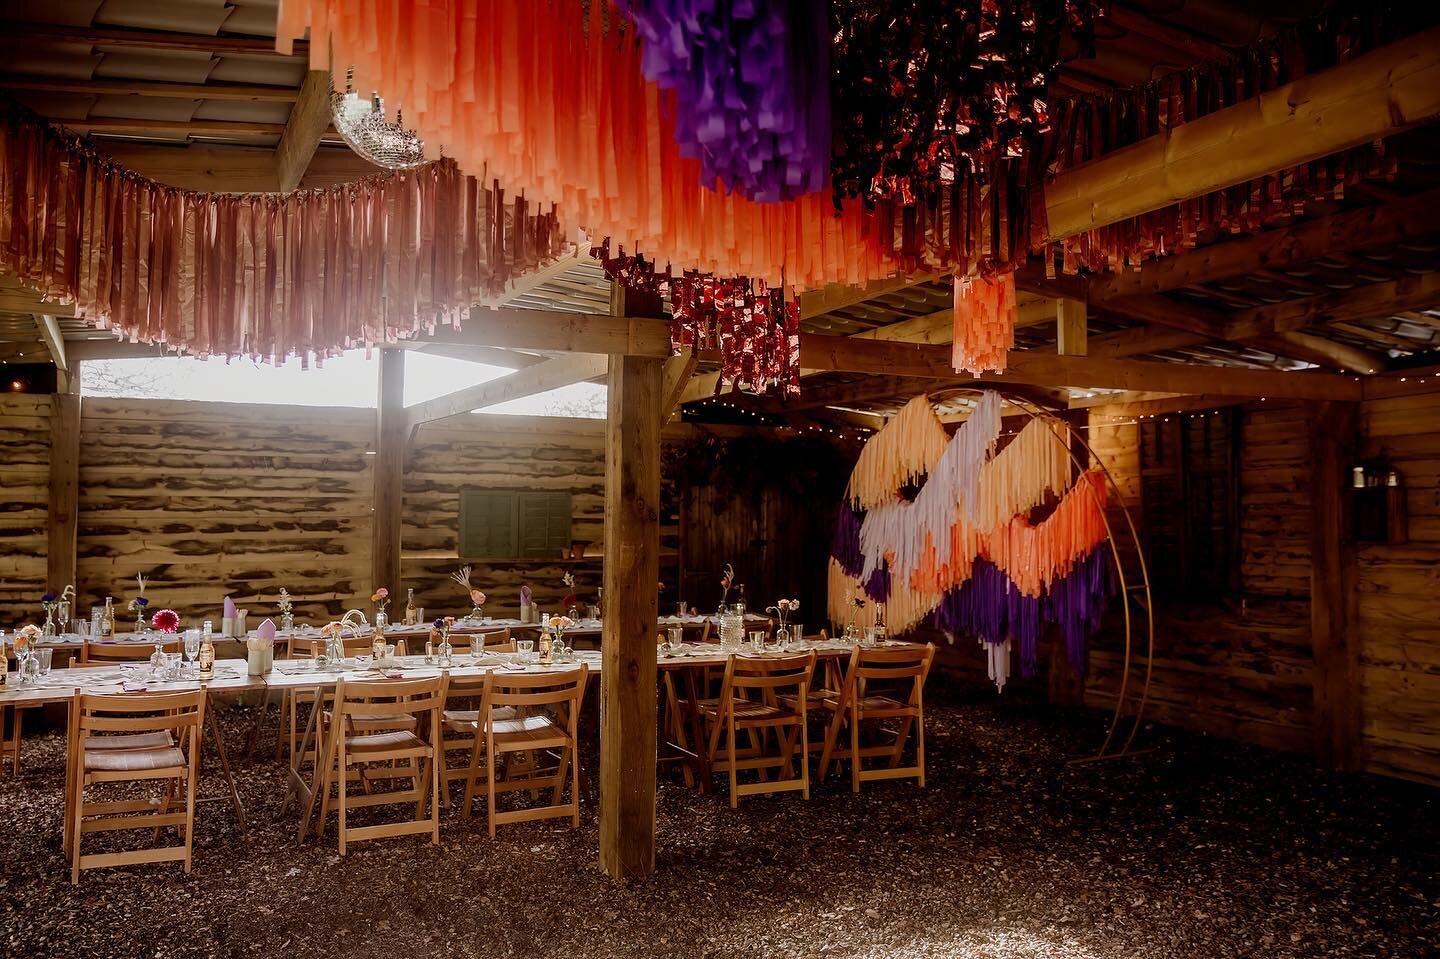 If you&rsquo;re looking for big impact decor, streamers are your answer! 

And for all manner of amazing wedding suppliers, check out the crew:

Concept: @sonder.lust.photography &amp; @the_prop_library 
Photography lead: @sonder.lust.photography 
Se